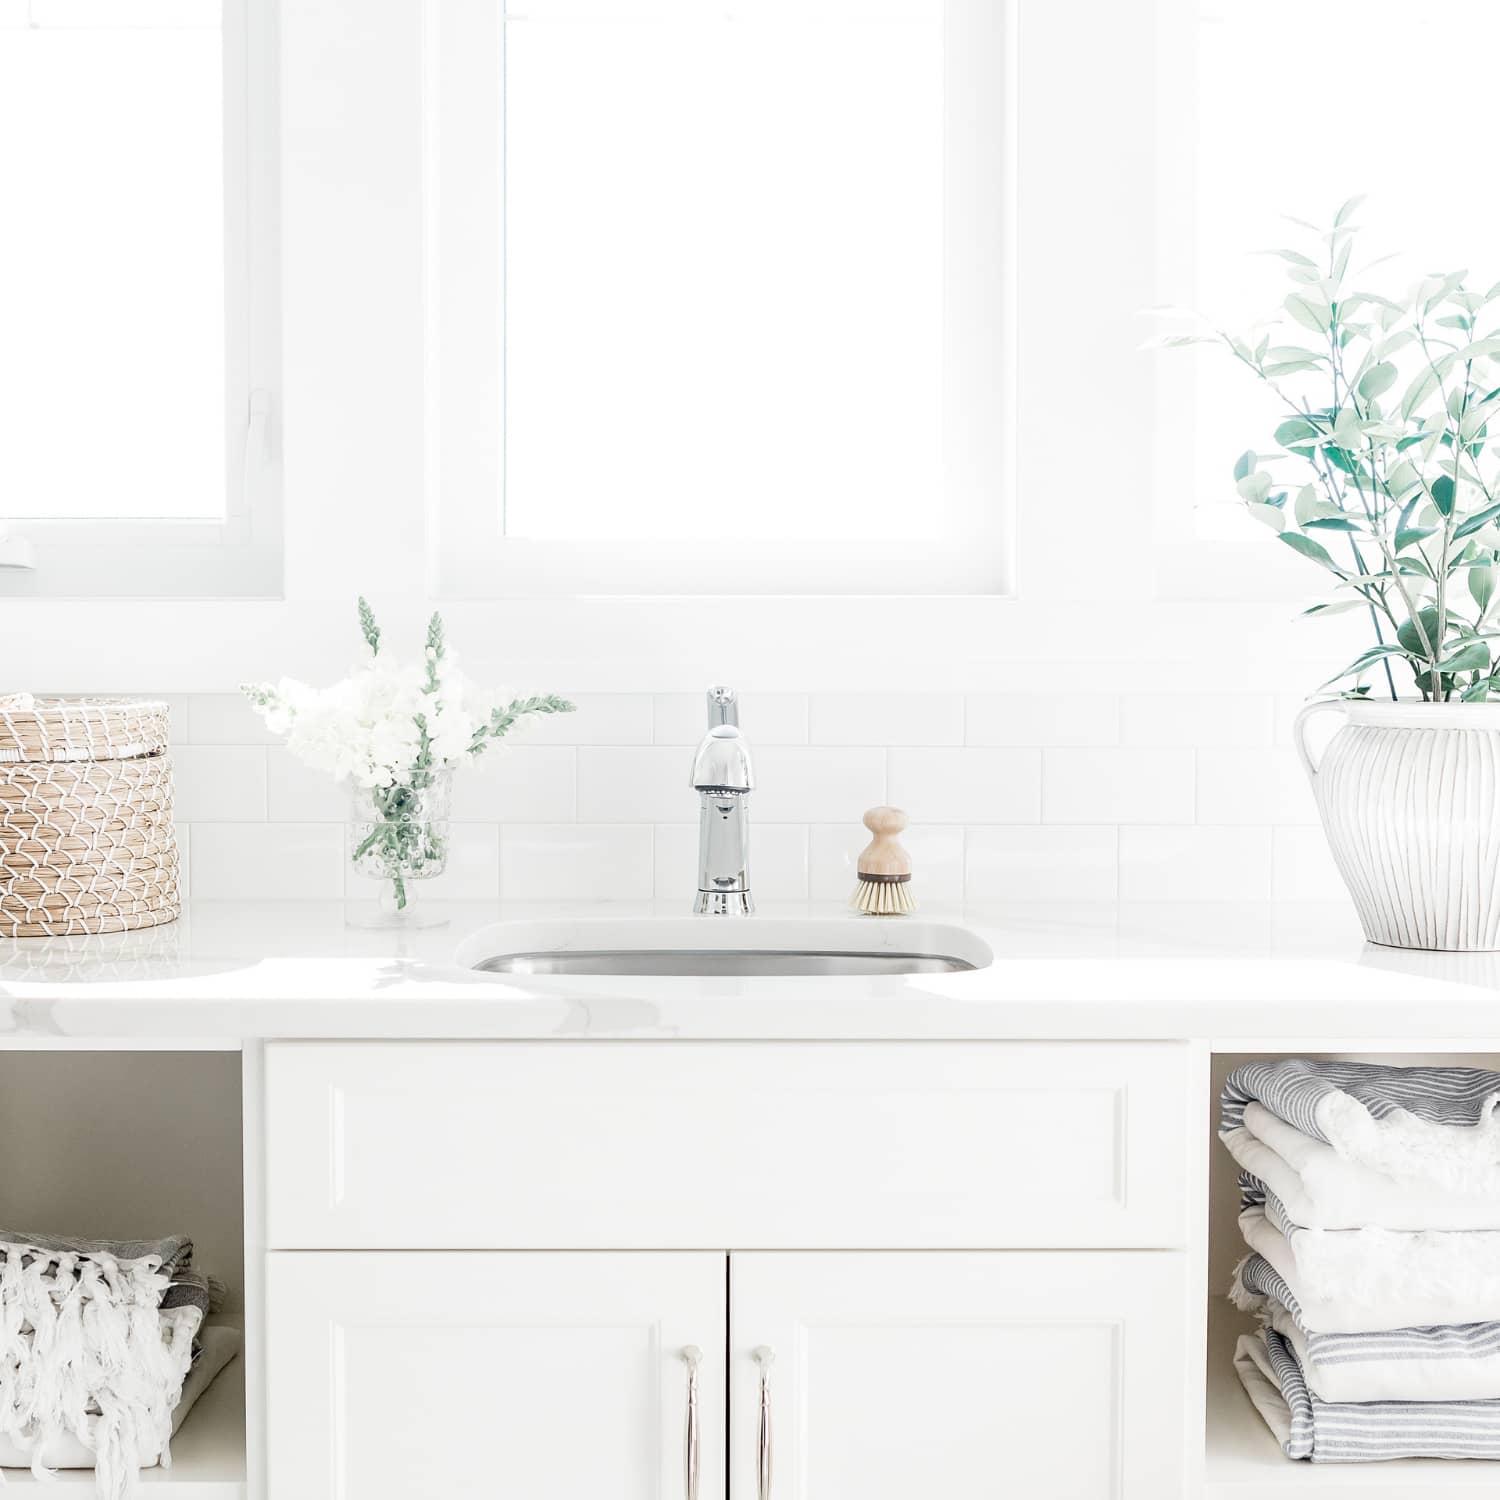 A minimalist laundry room with white cabinets, folded grey striped linens, a small basket, and a plant against a white background.